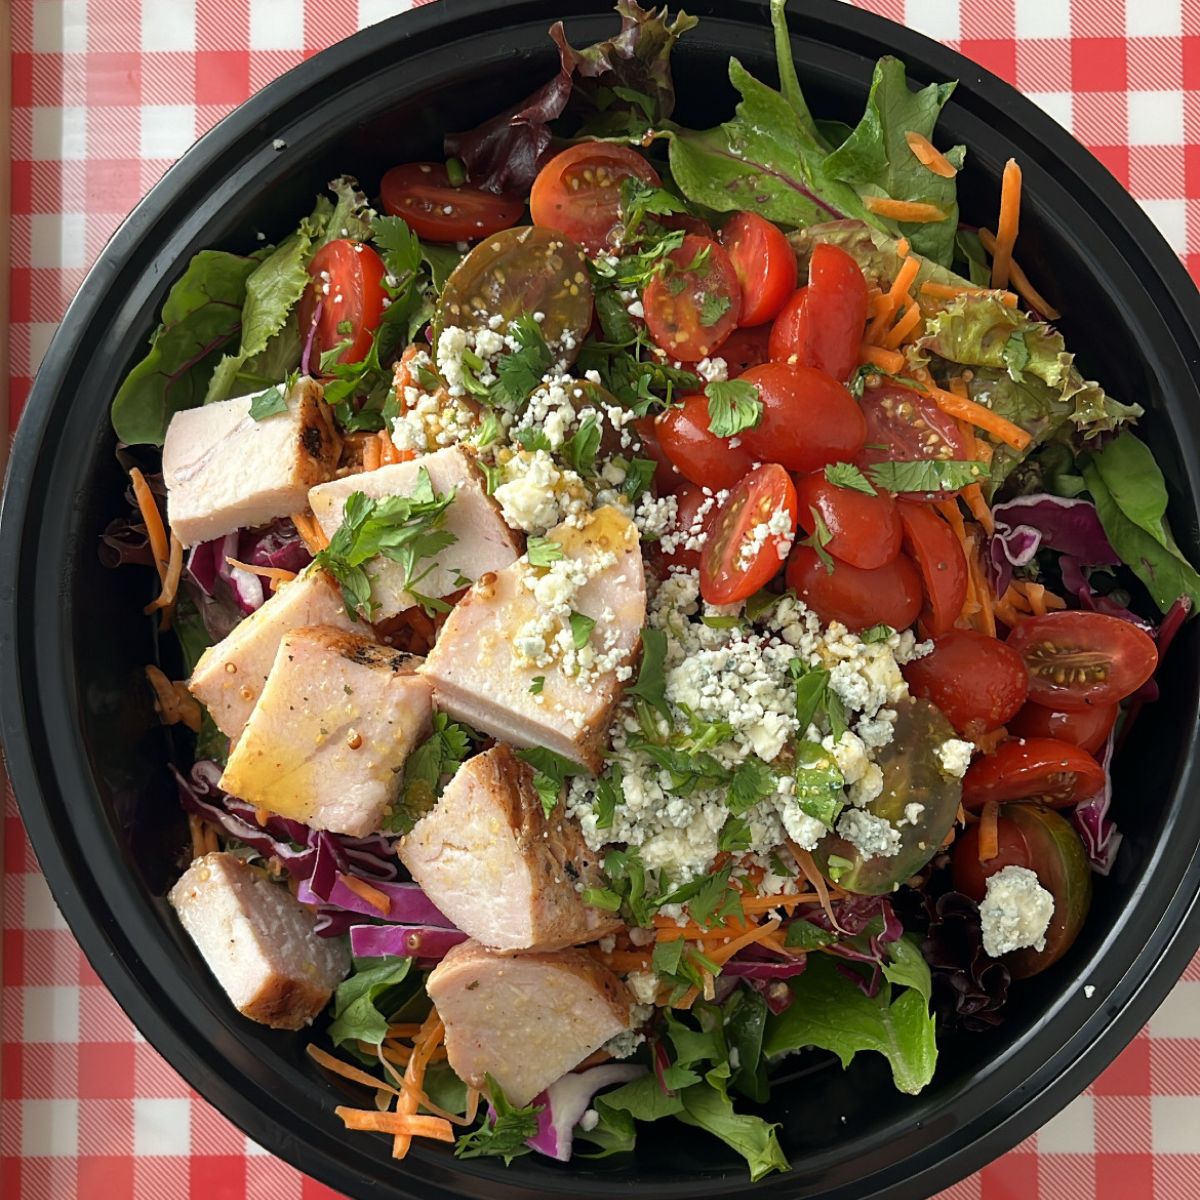 salad with turkey, tomatoes, cheese, and fresh herbs in a black meal prep box on a red checked background.